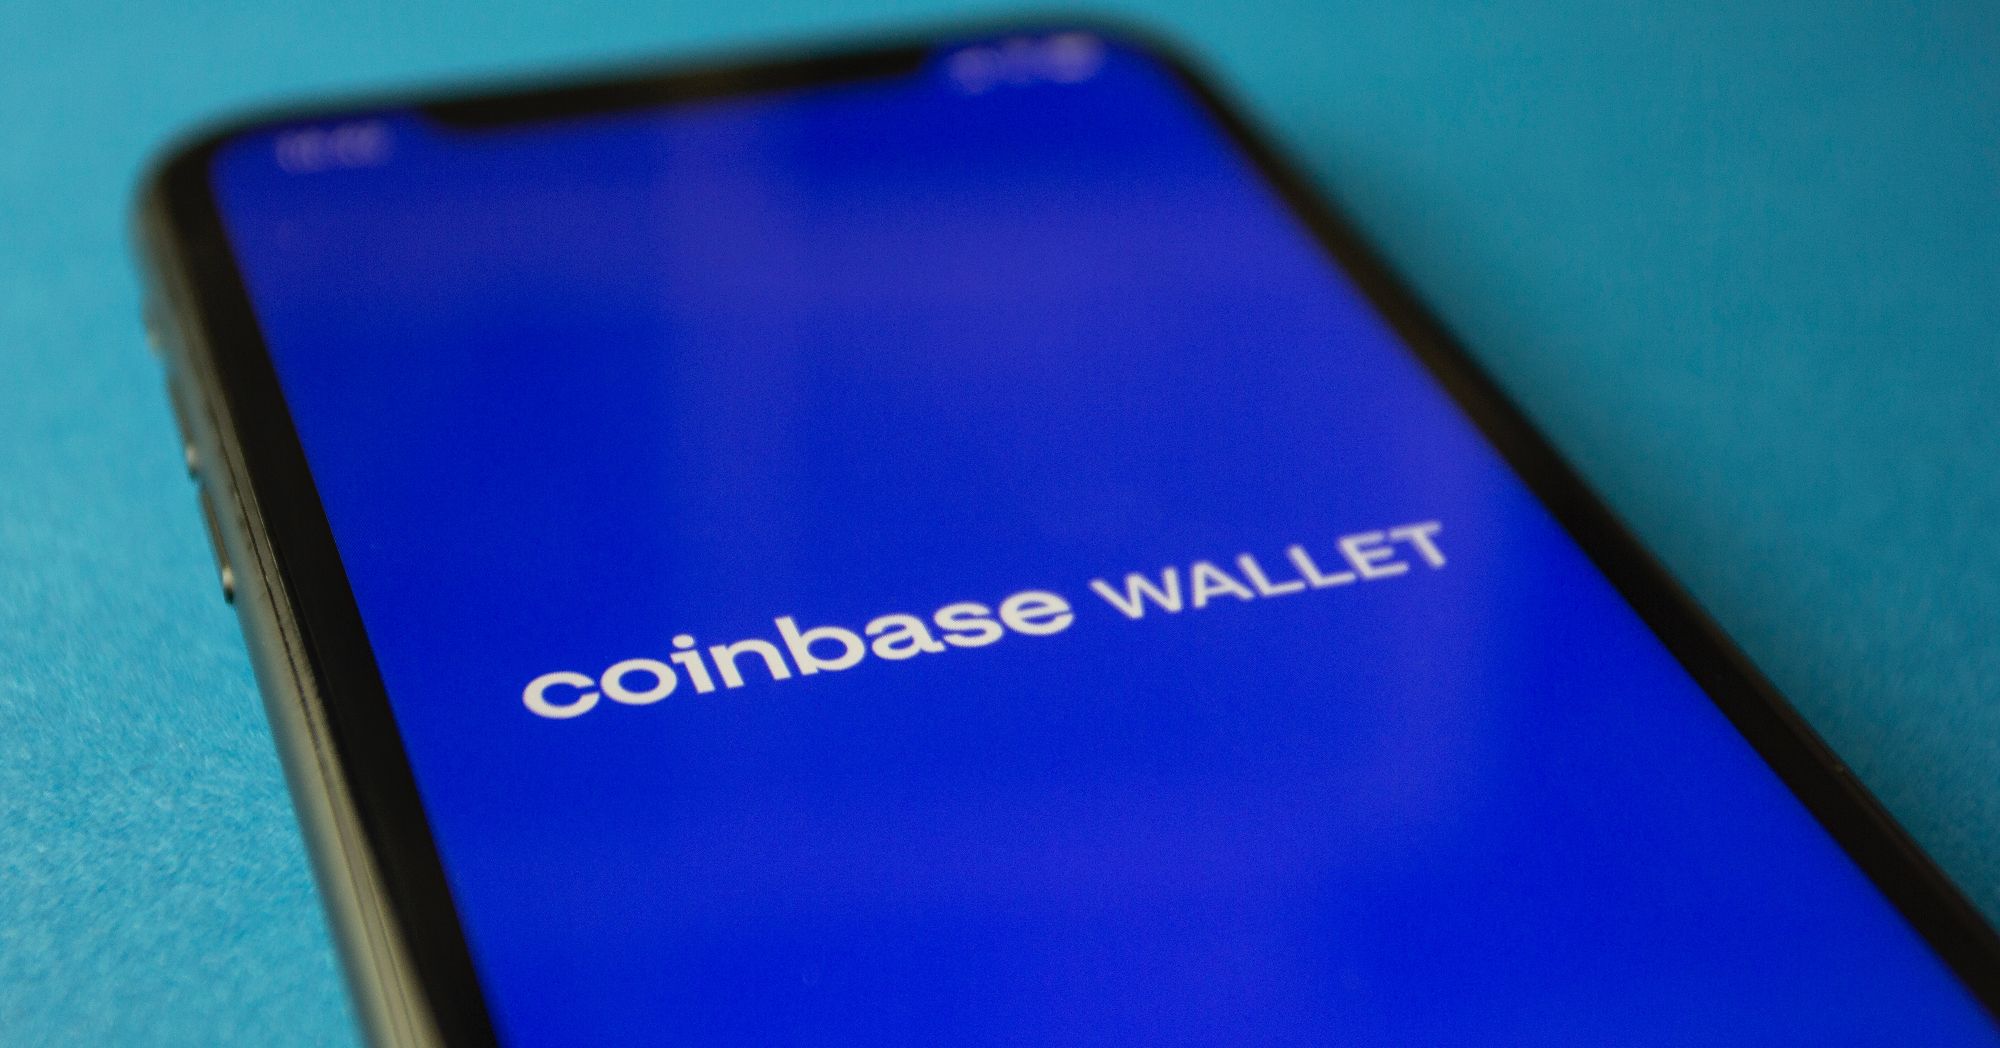 The coinbase wallet application appears on the smartphone screen